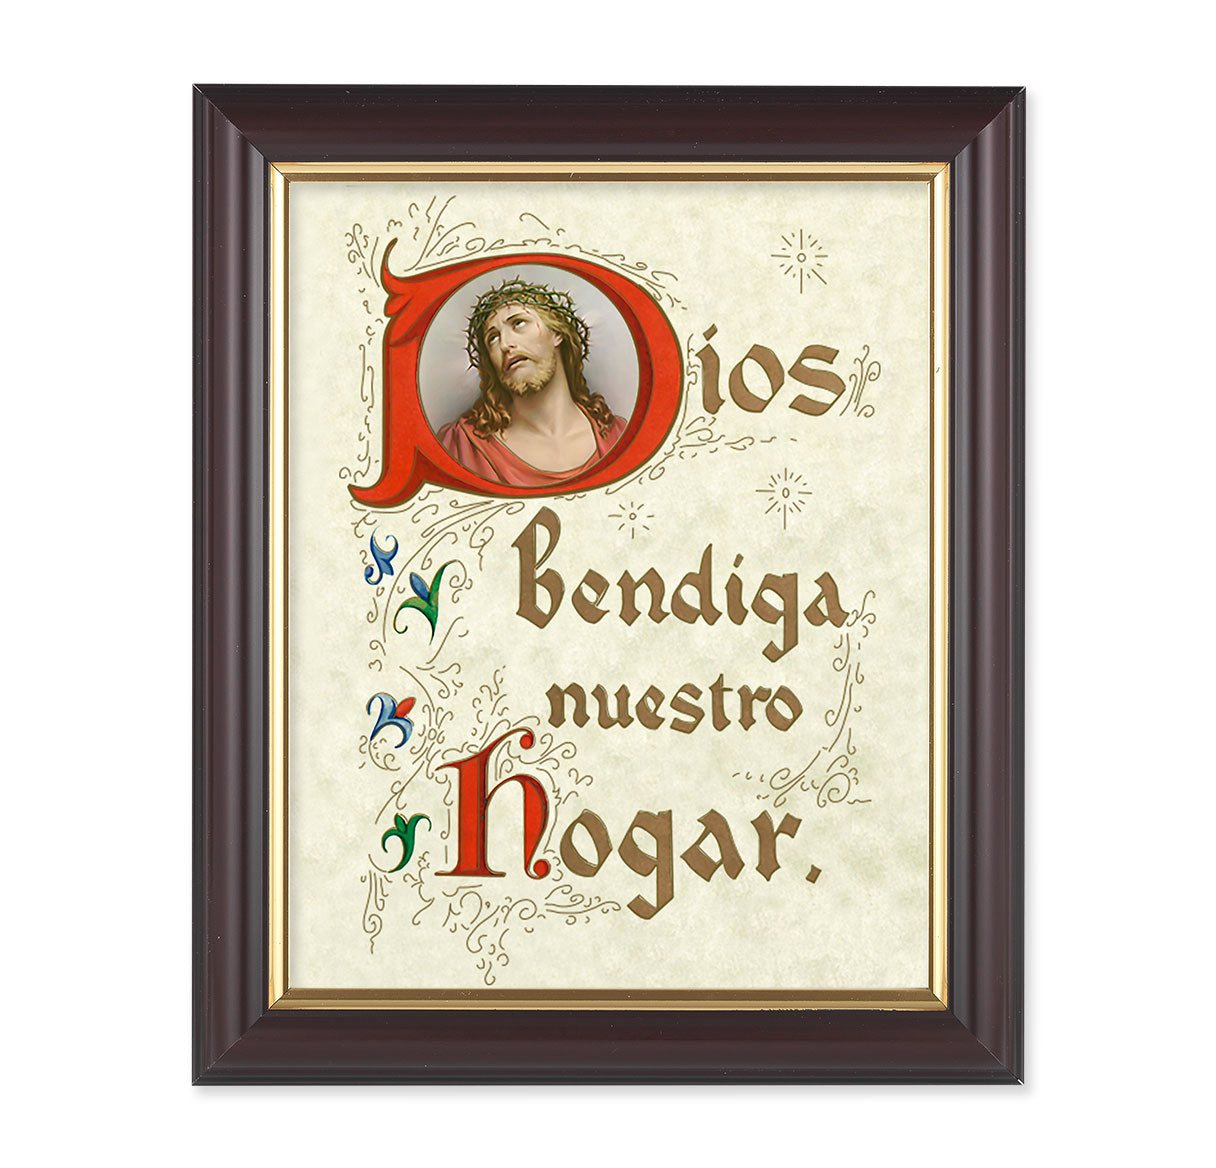 House Blessing (Spanish) Picture Framed Wall Art Decor Medium, Classic Fluted Dark Walnut Finished Frame with Gold-Leaf Lip